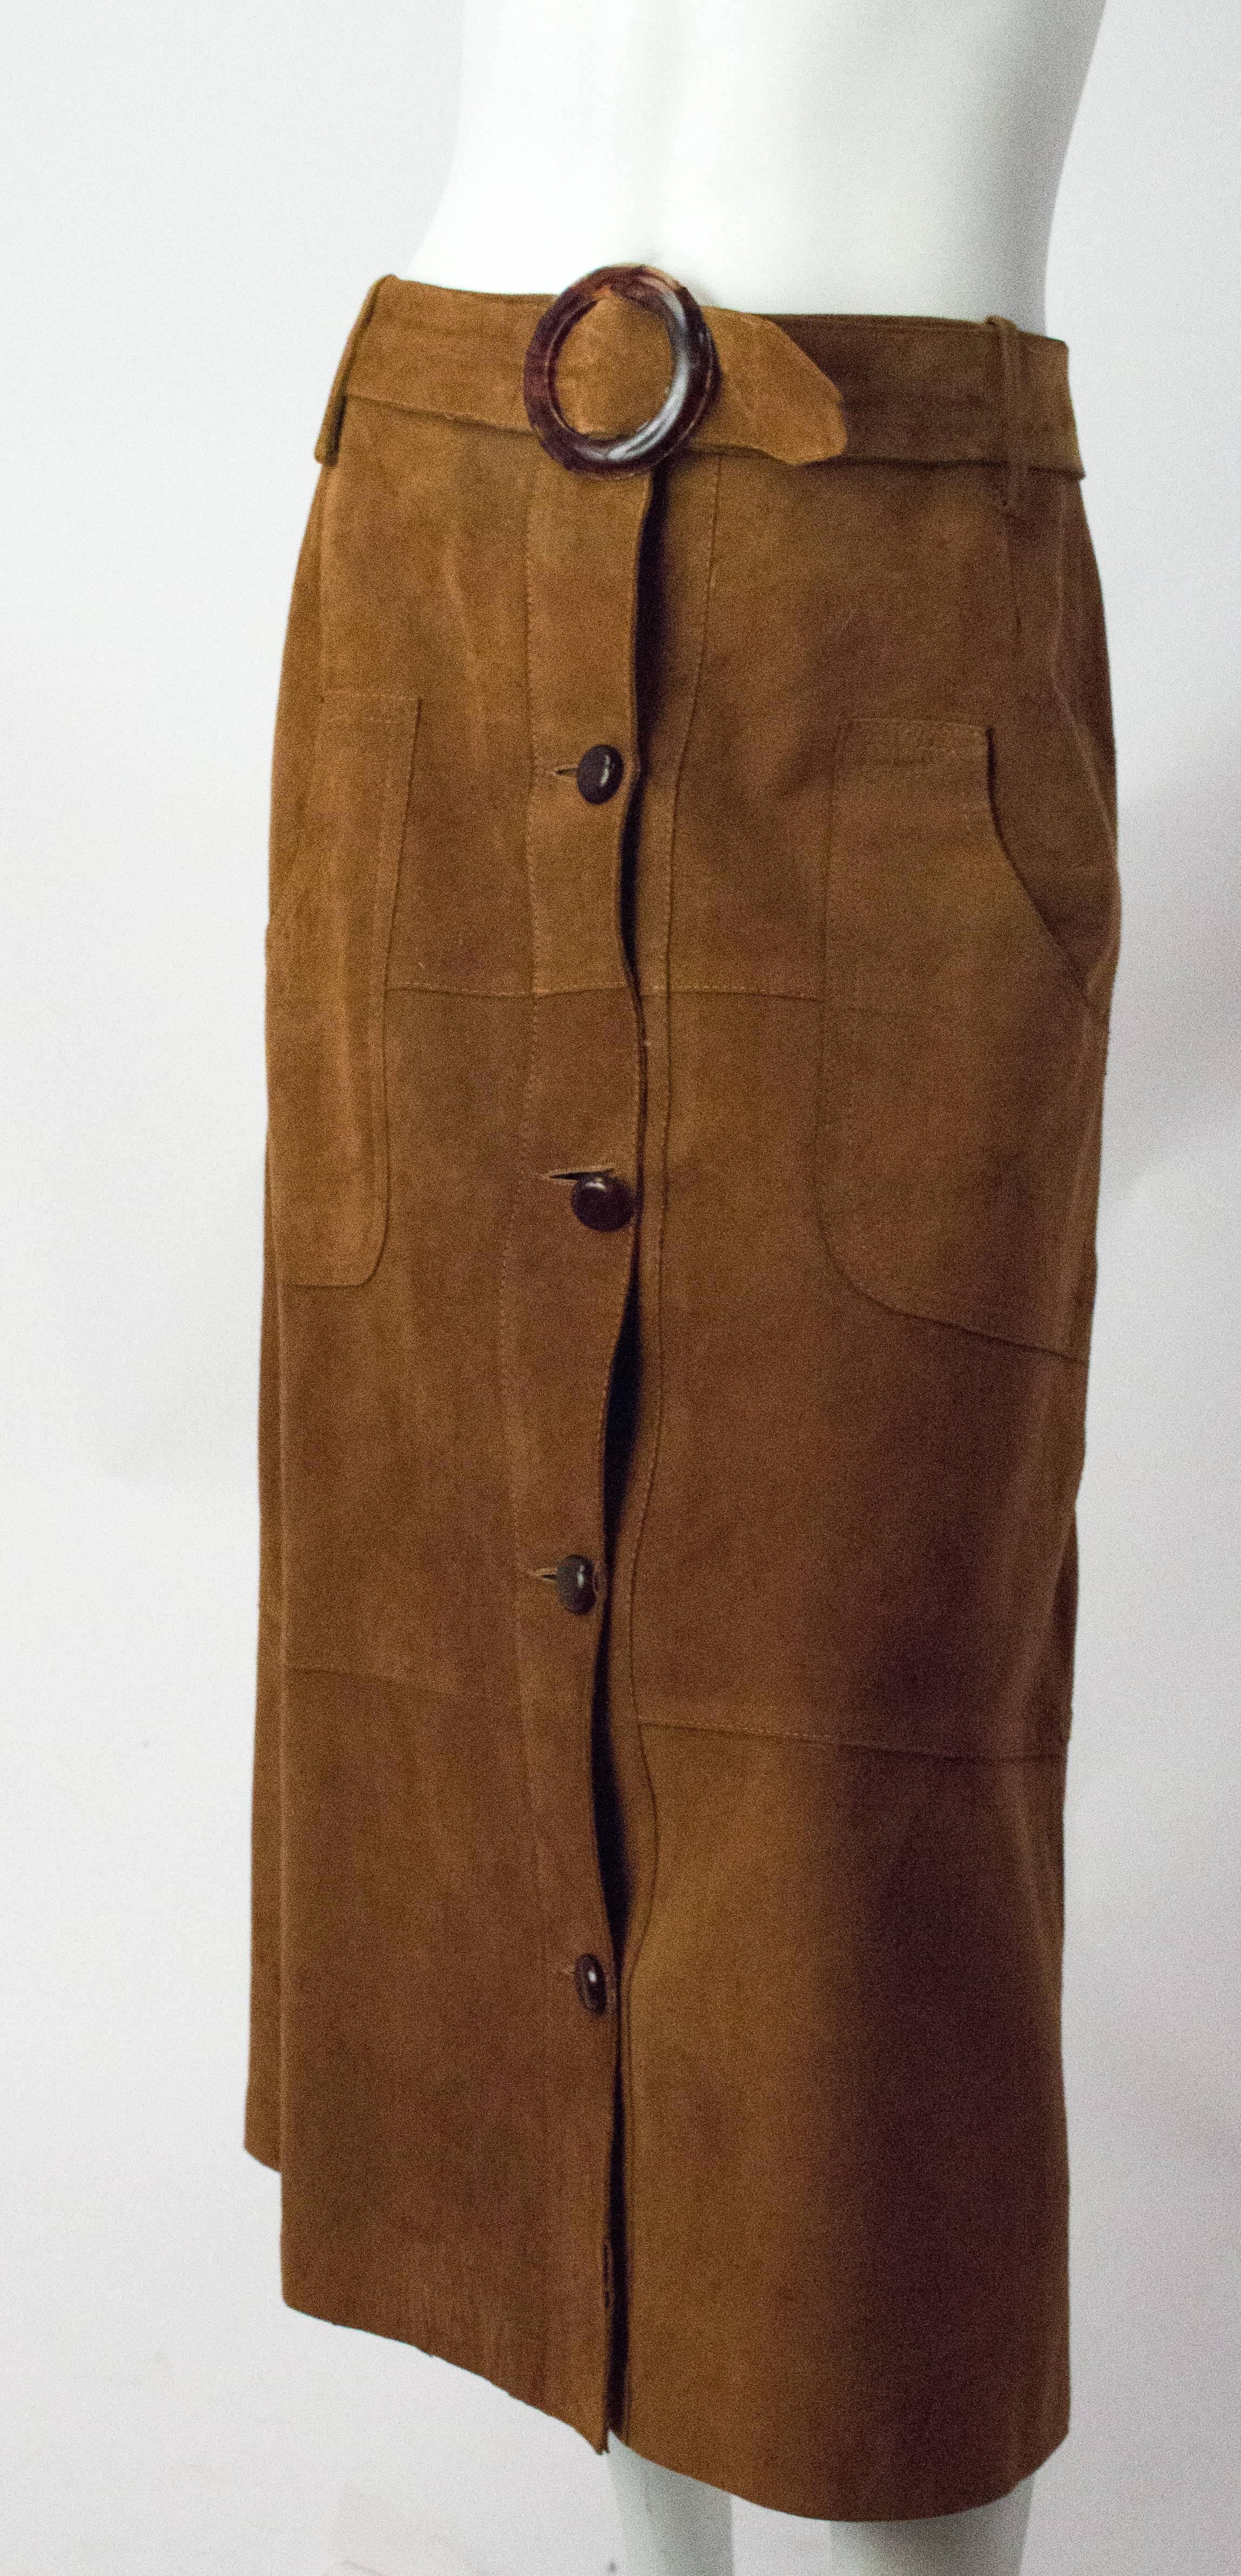 70s Tan Belted Suede Button-Up Skirt. Fully lined. 